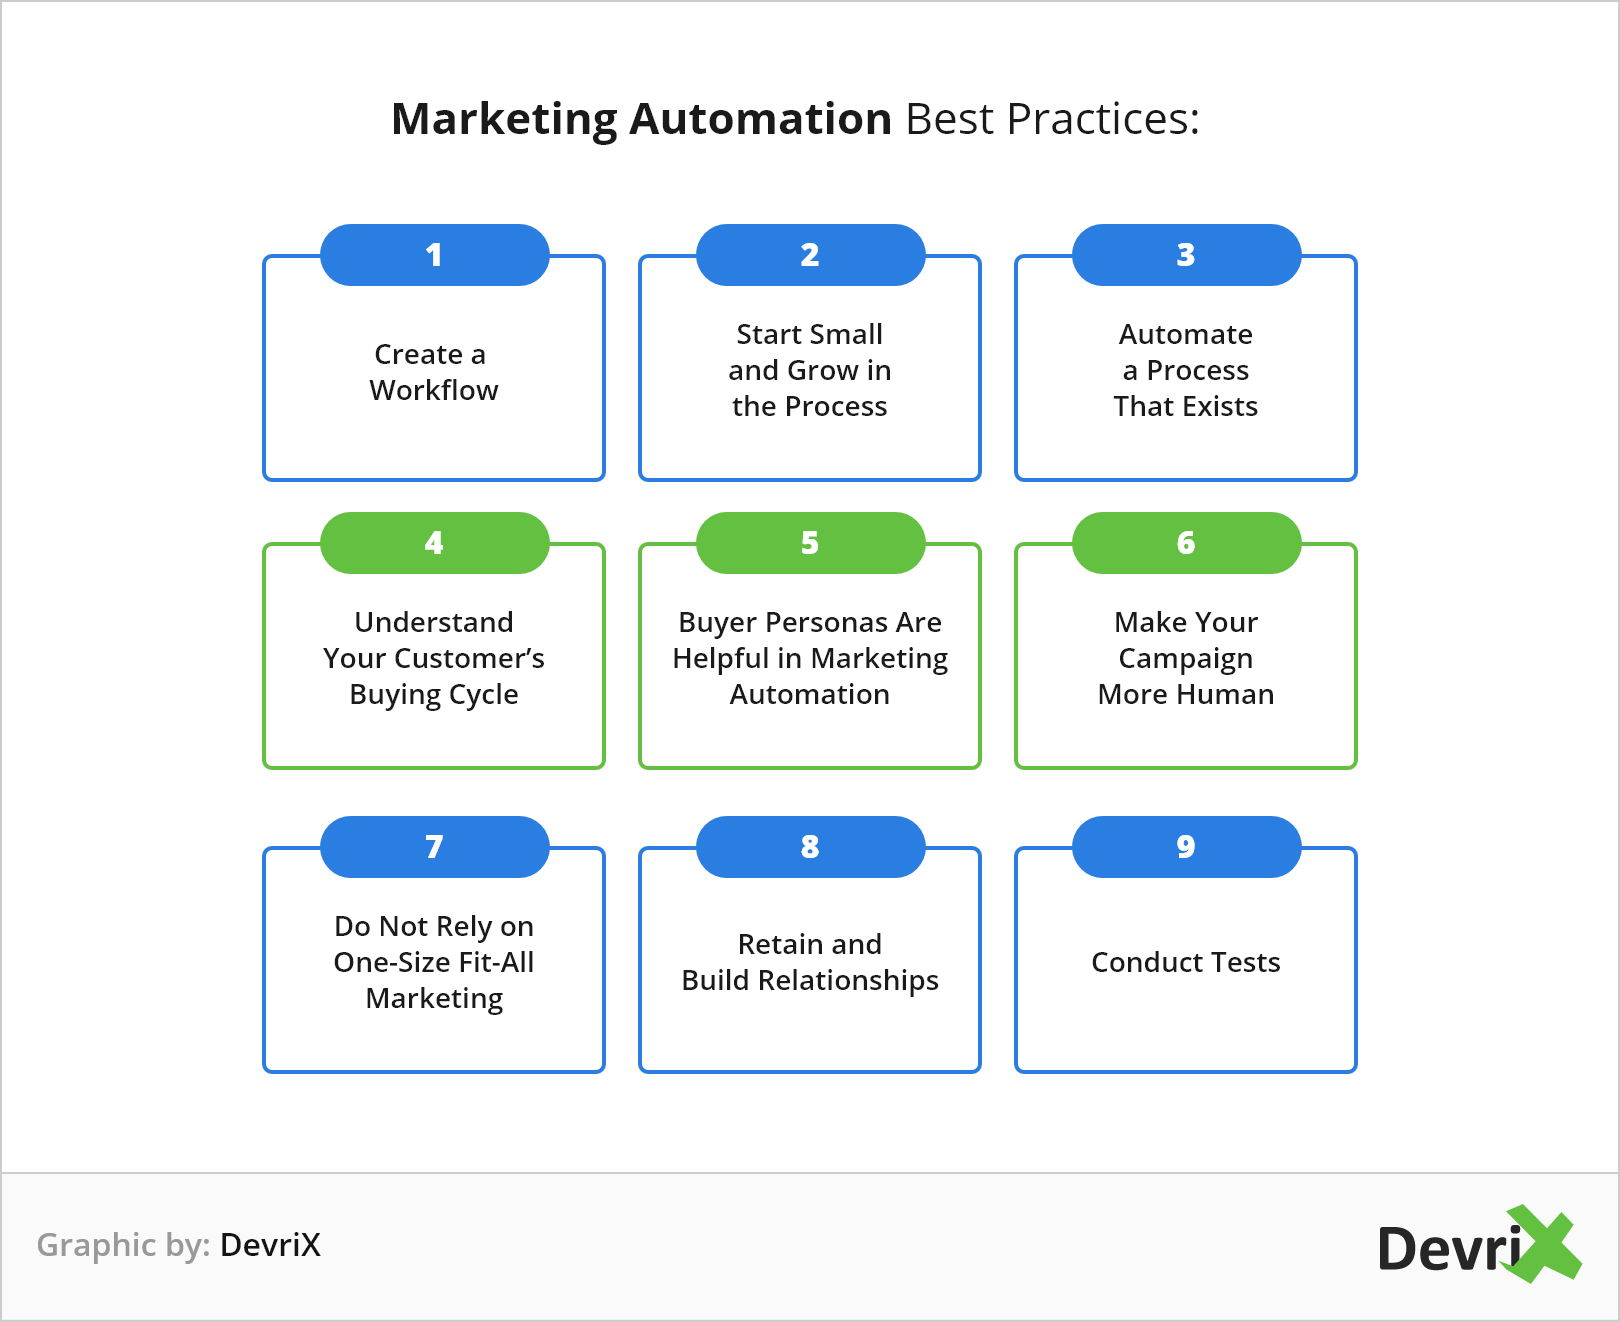 Marketing Automation Best Practices Infographic 